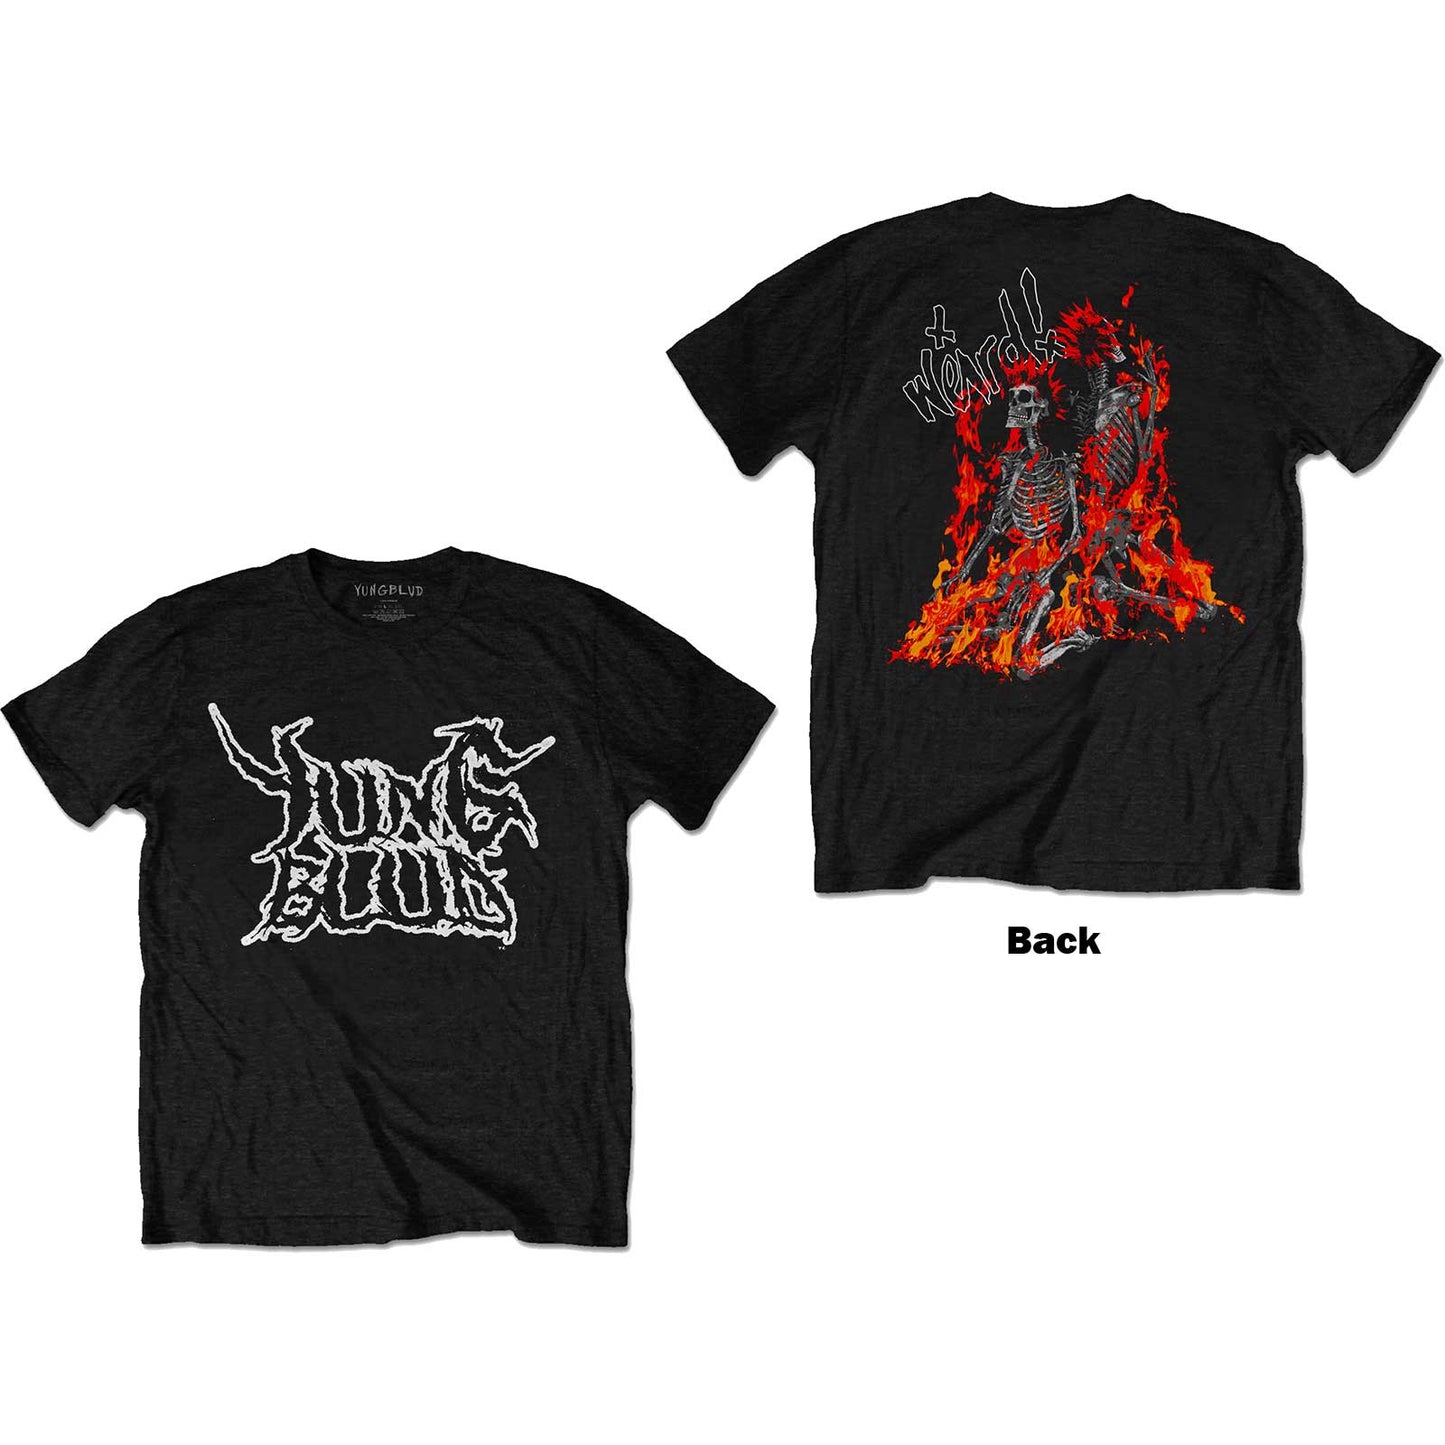 YUNGBLUD - Weird Flaming Skeletons T-Shirt